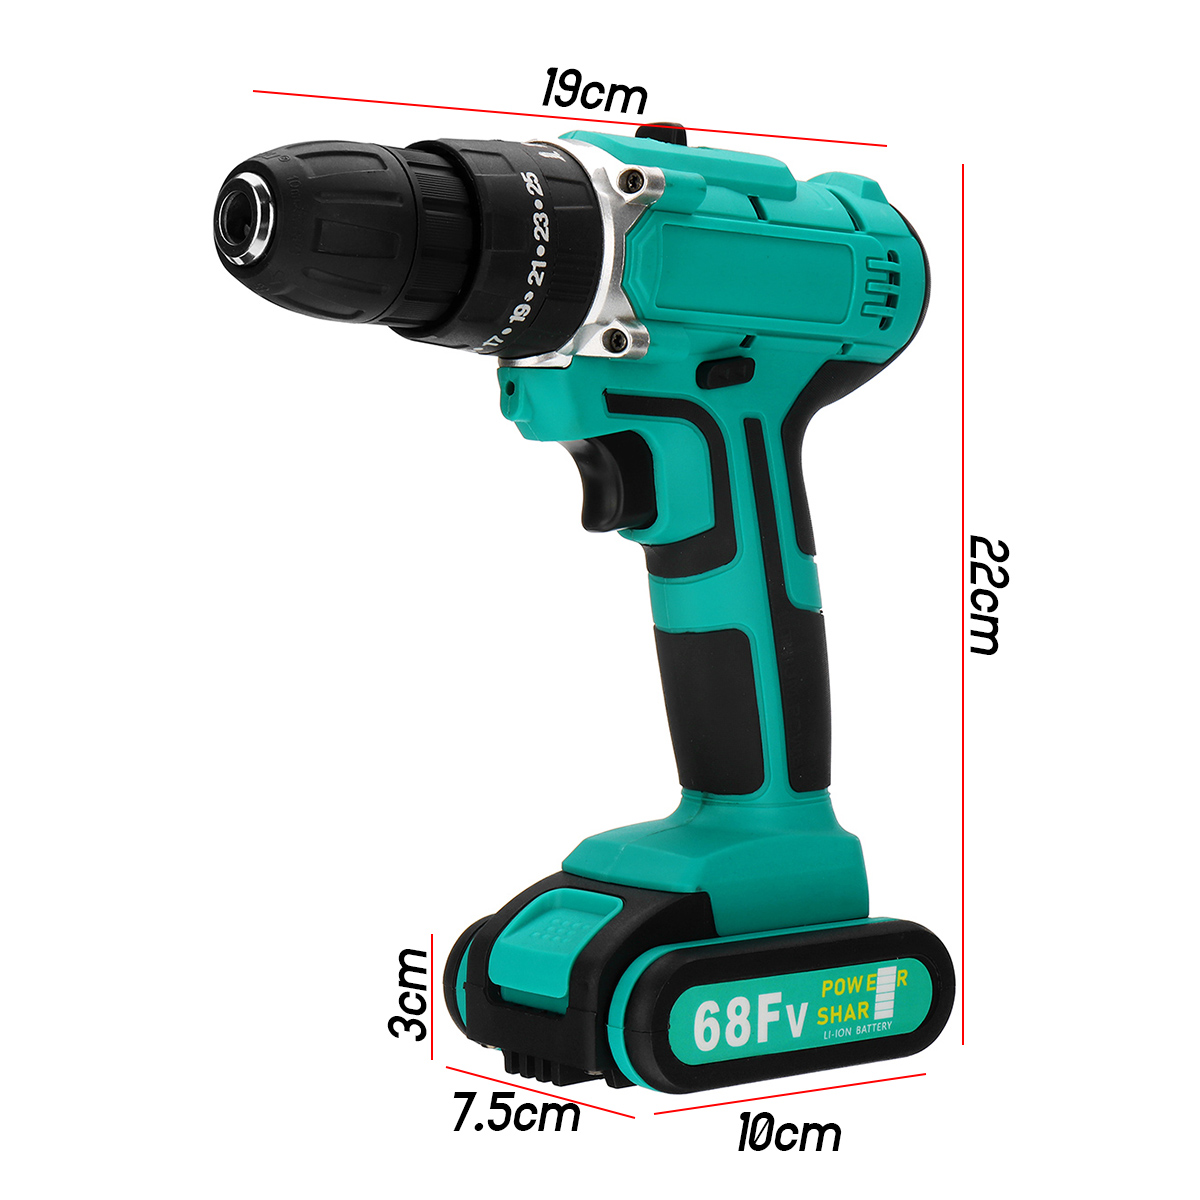 68FV-Household-Lithium-Electric-Screwdriver-2-Speed-Impact-Power-Drills-Rechargeable-Drill-Driver-W--1560586-10